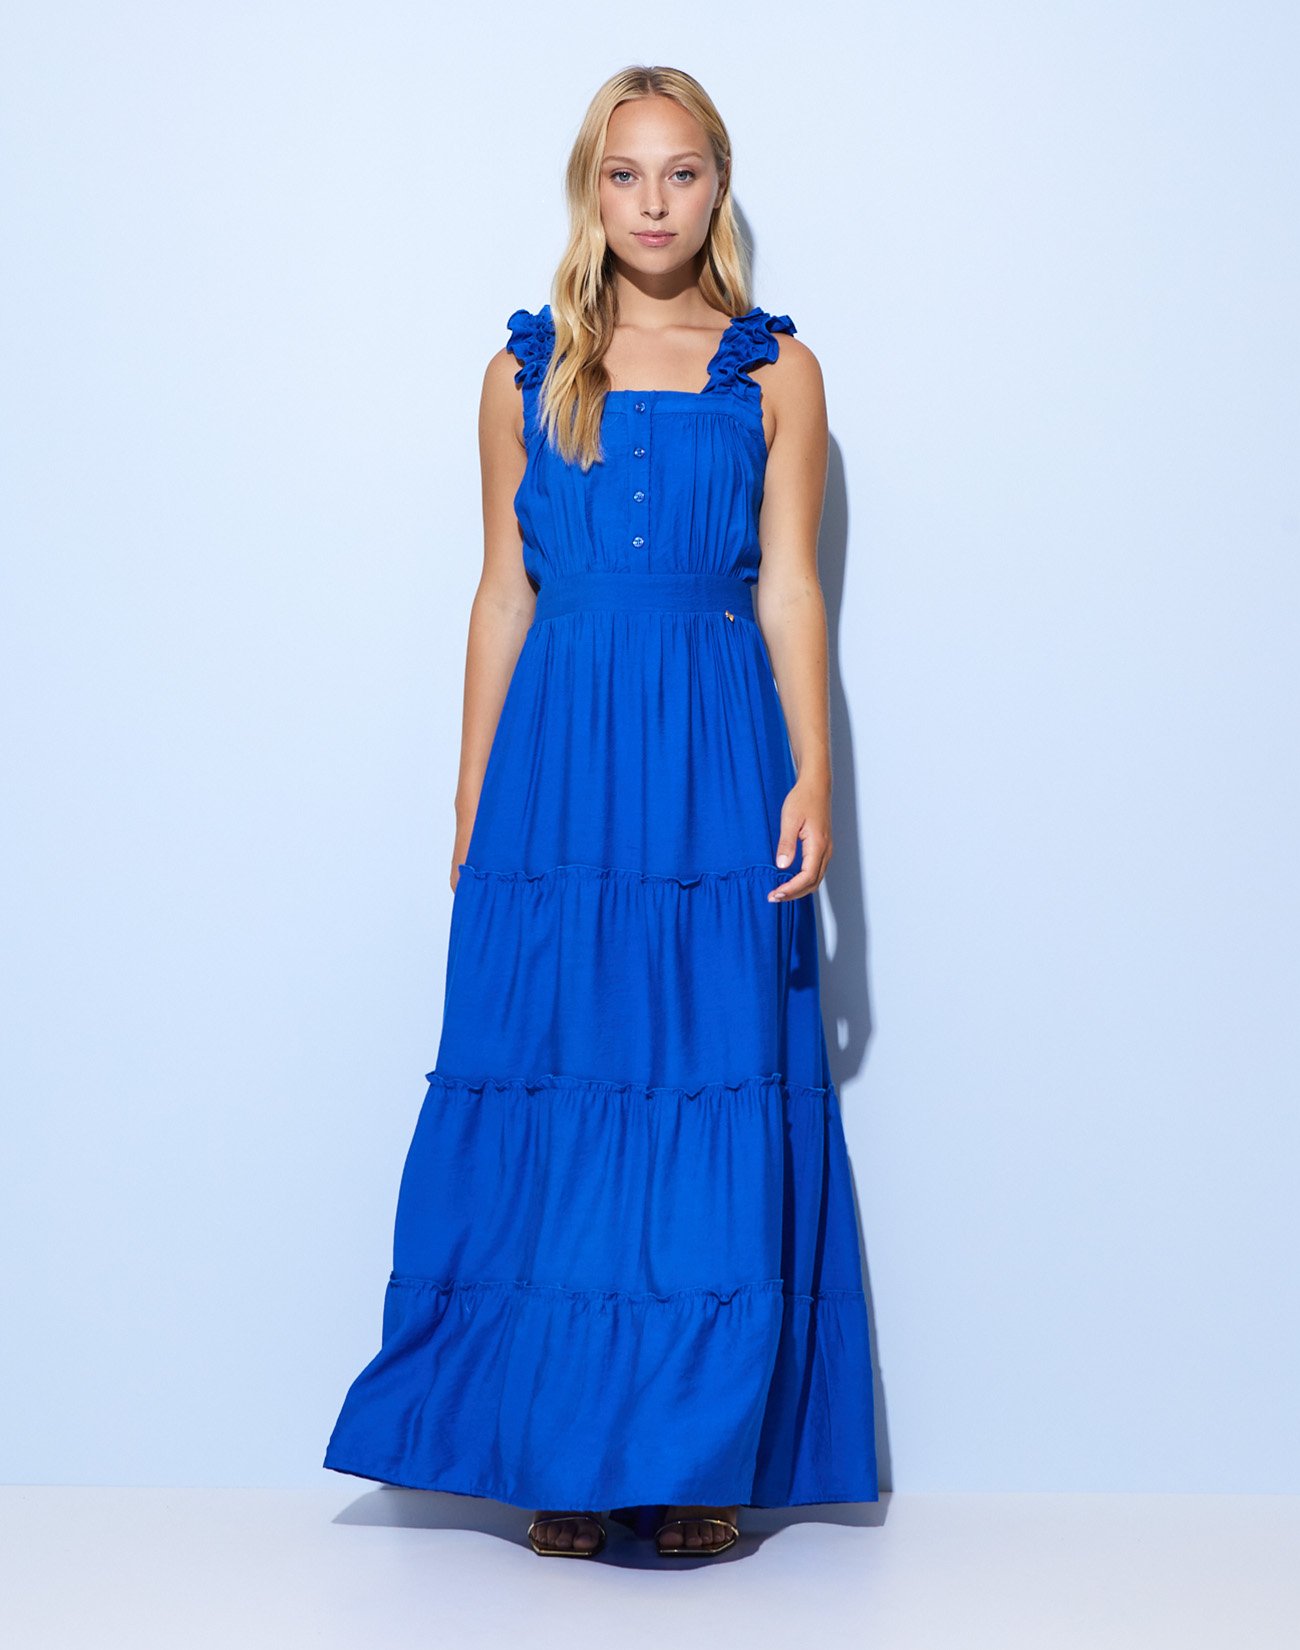 Maxi dress with bow